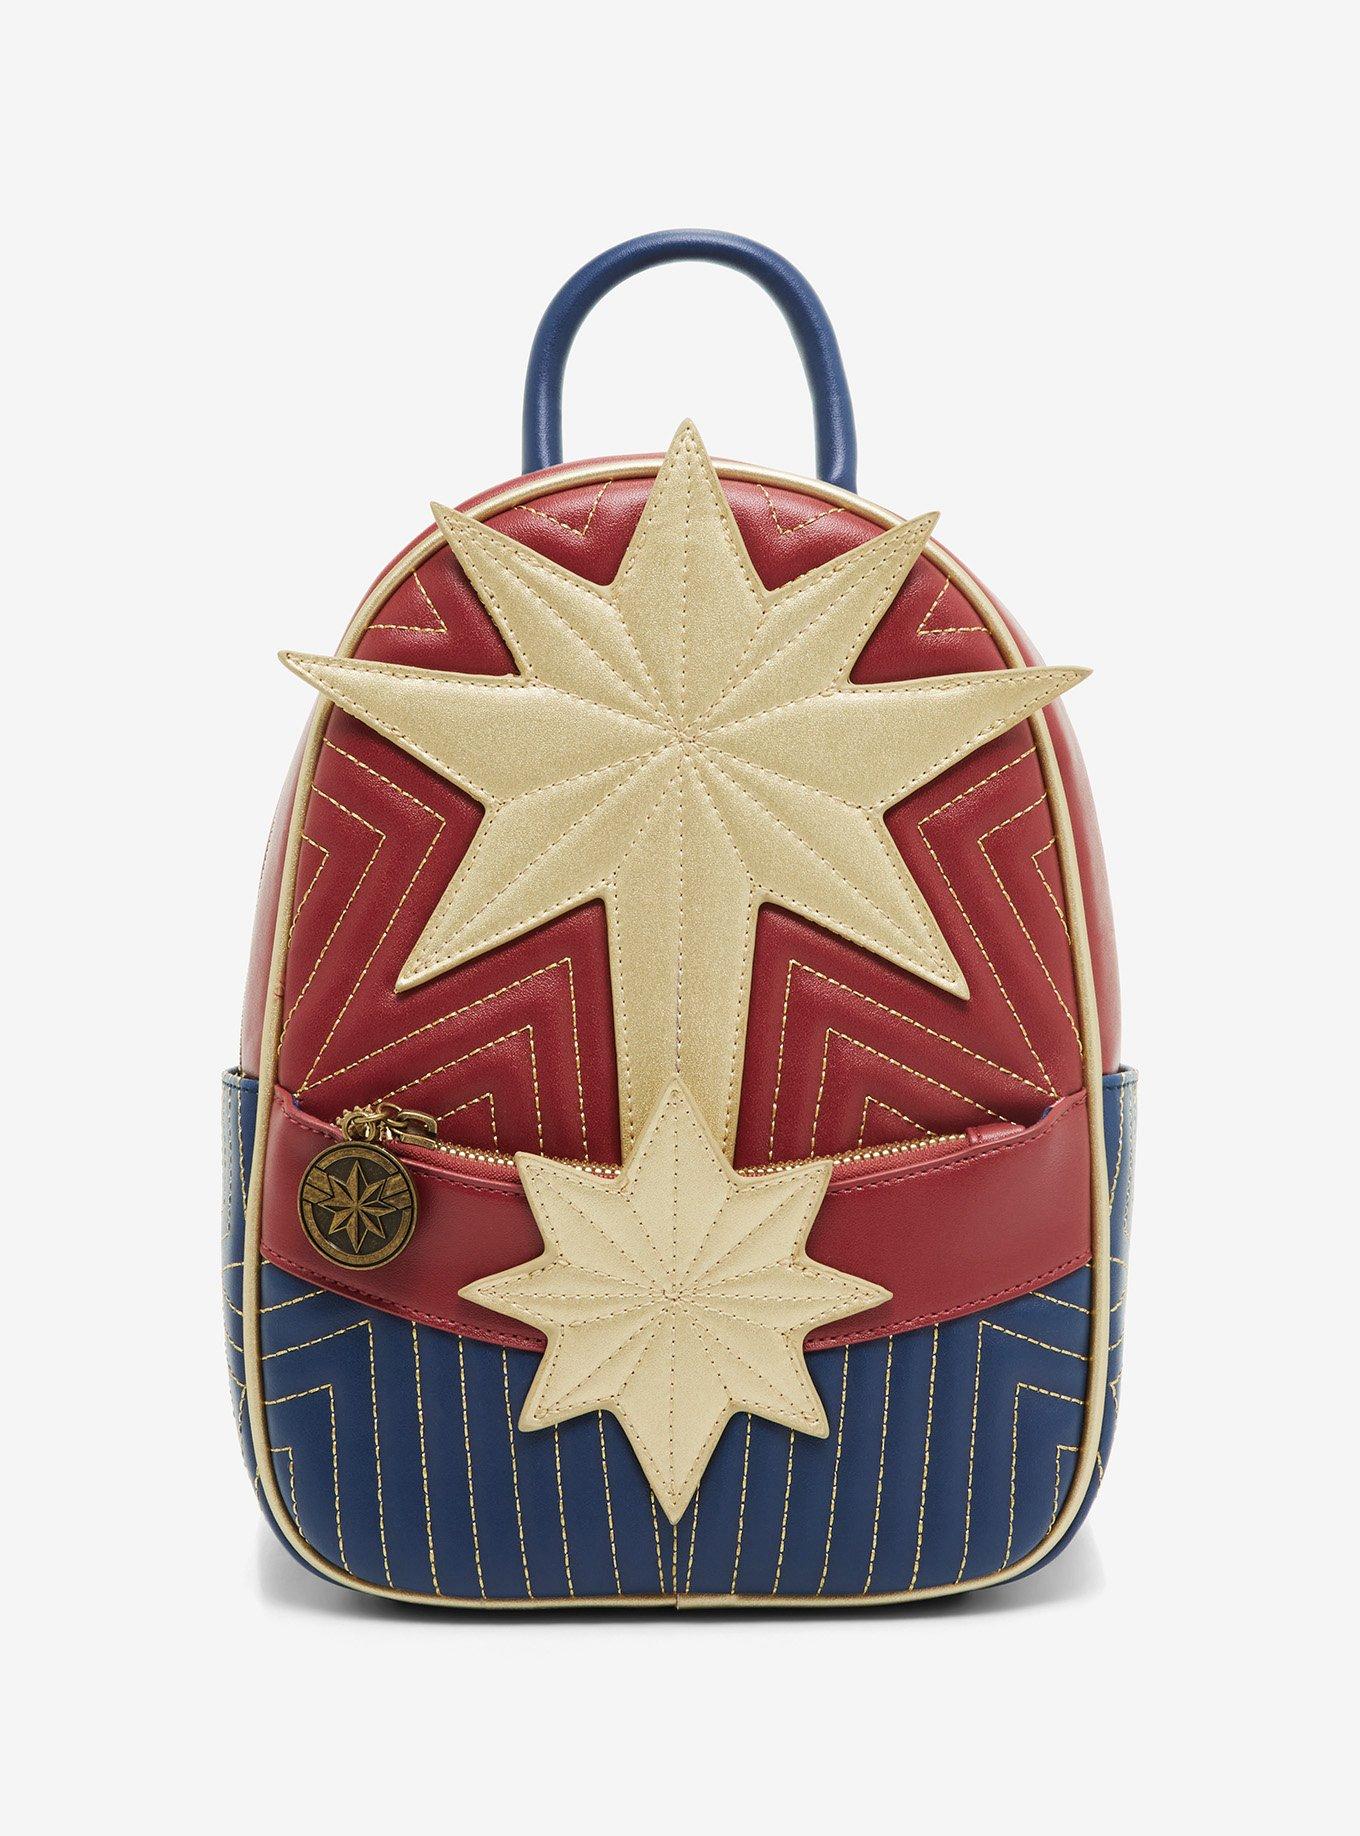 Louis Vuitton's New Future-Inspired Collection Features Duffles That Turn  Into Sleeping Bags